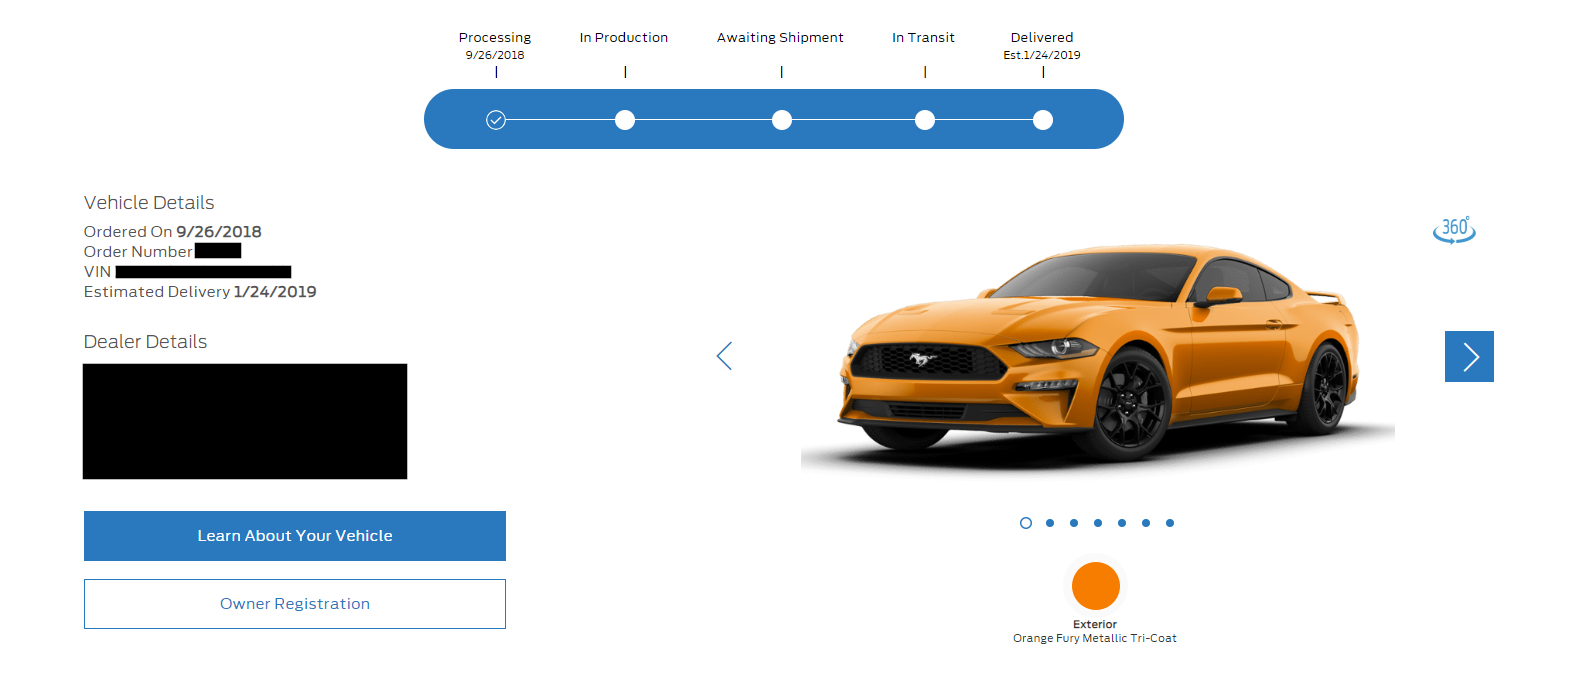 2018-11-05 13_24_25-Ford Vehicle Vehicleordertracking.png